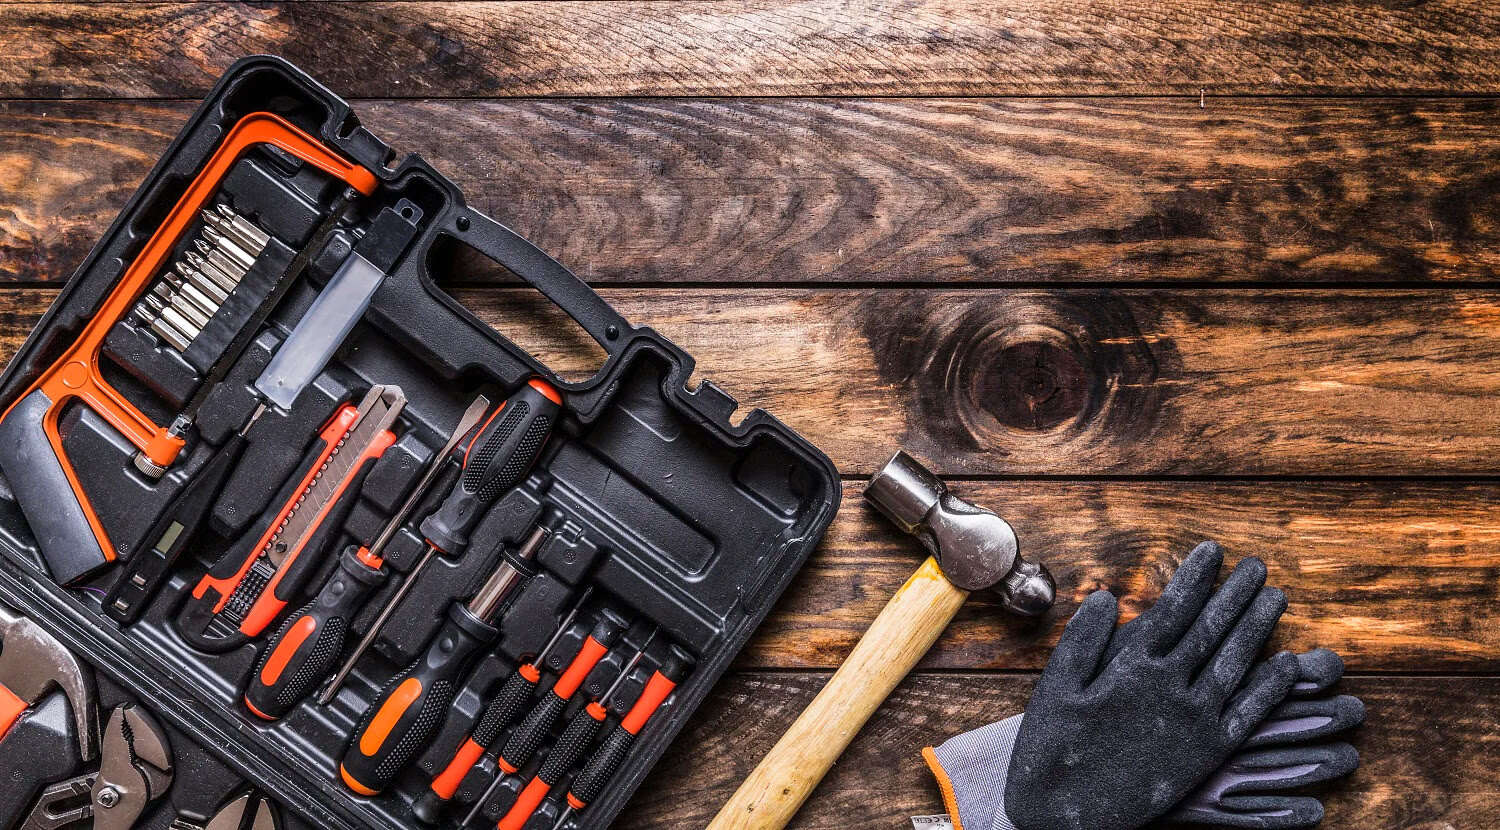 Hand Tools Set Review: The Best Options for DIY Enthusiasts